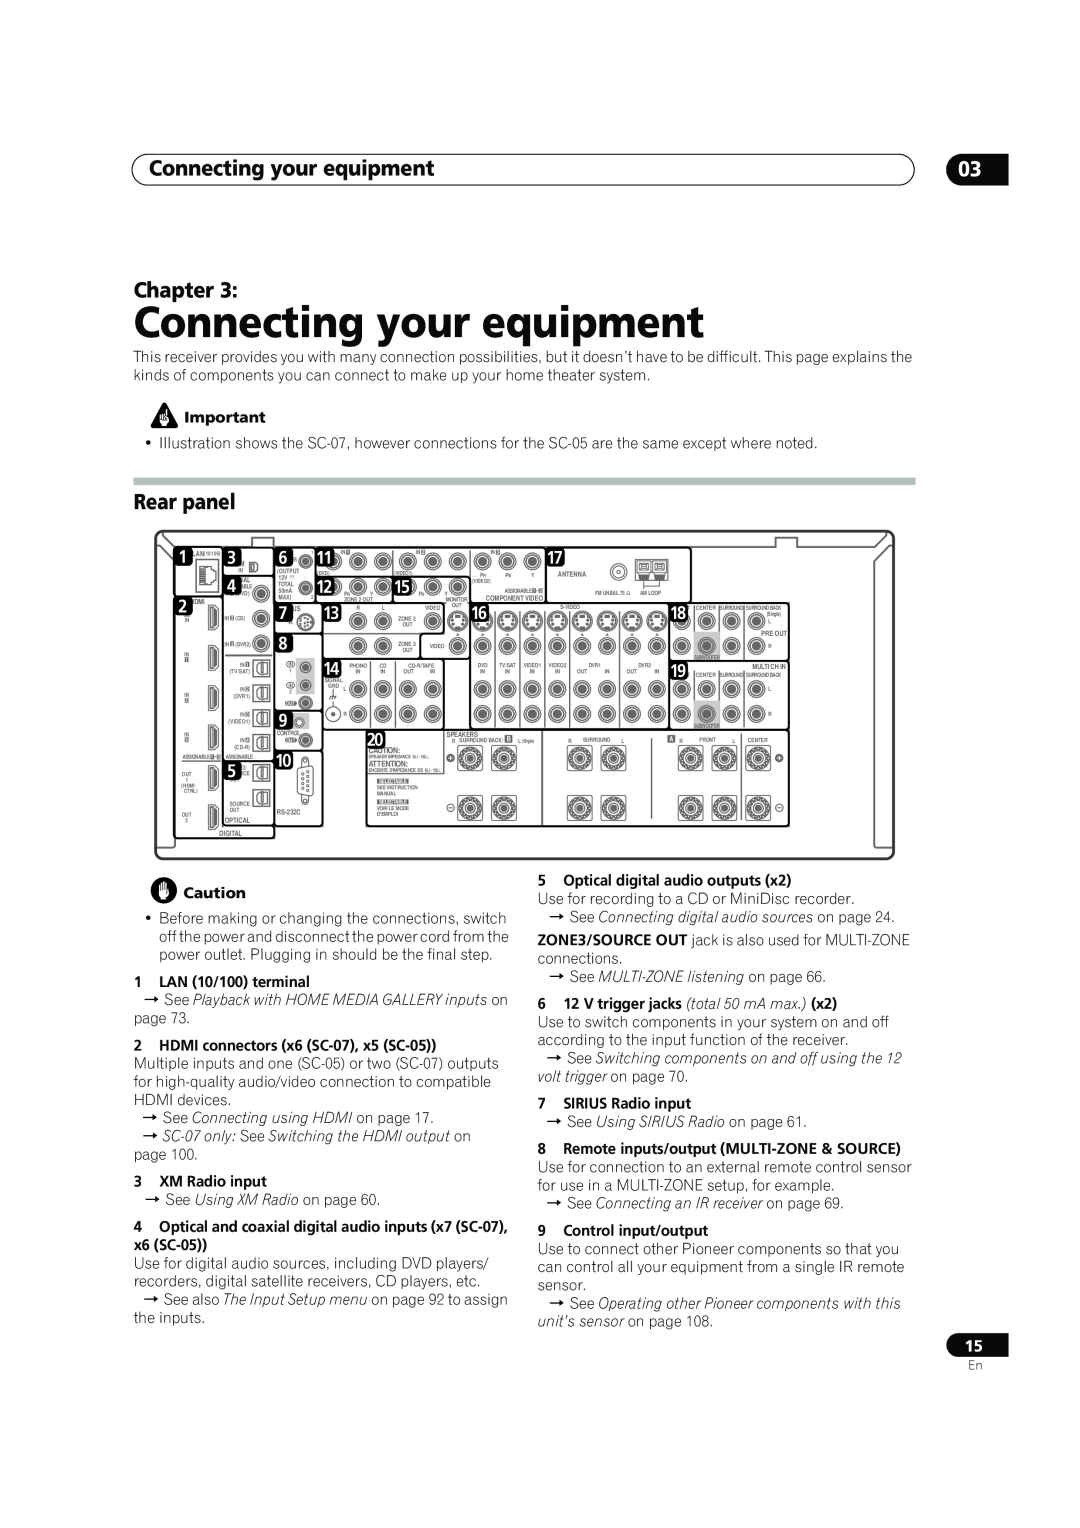 Pioneer SC-05, SC-07 Connecting your equipment, Rear panel, Chapter, 12 P R, 15 P R, LAN 10/100 terminal, XM Radio input 